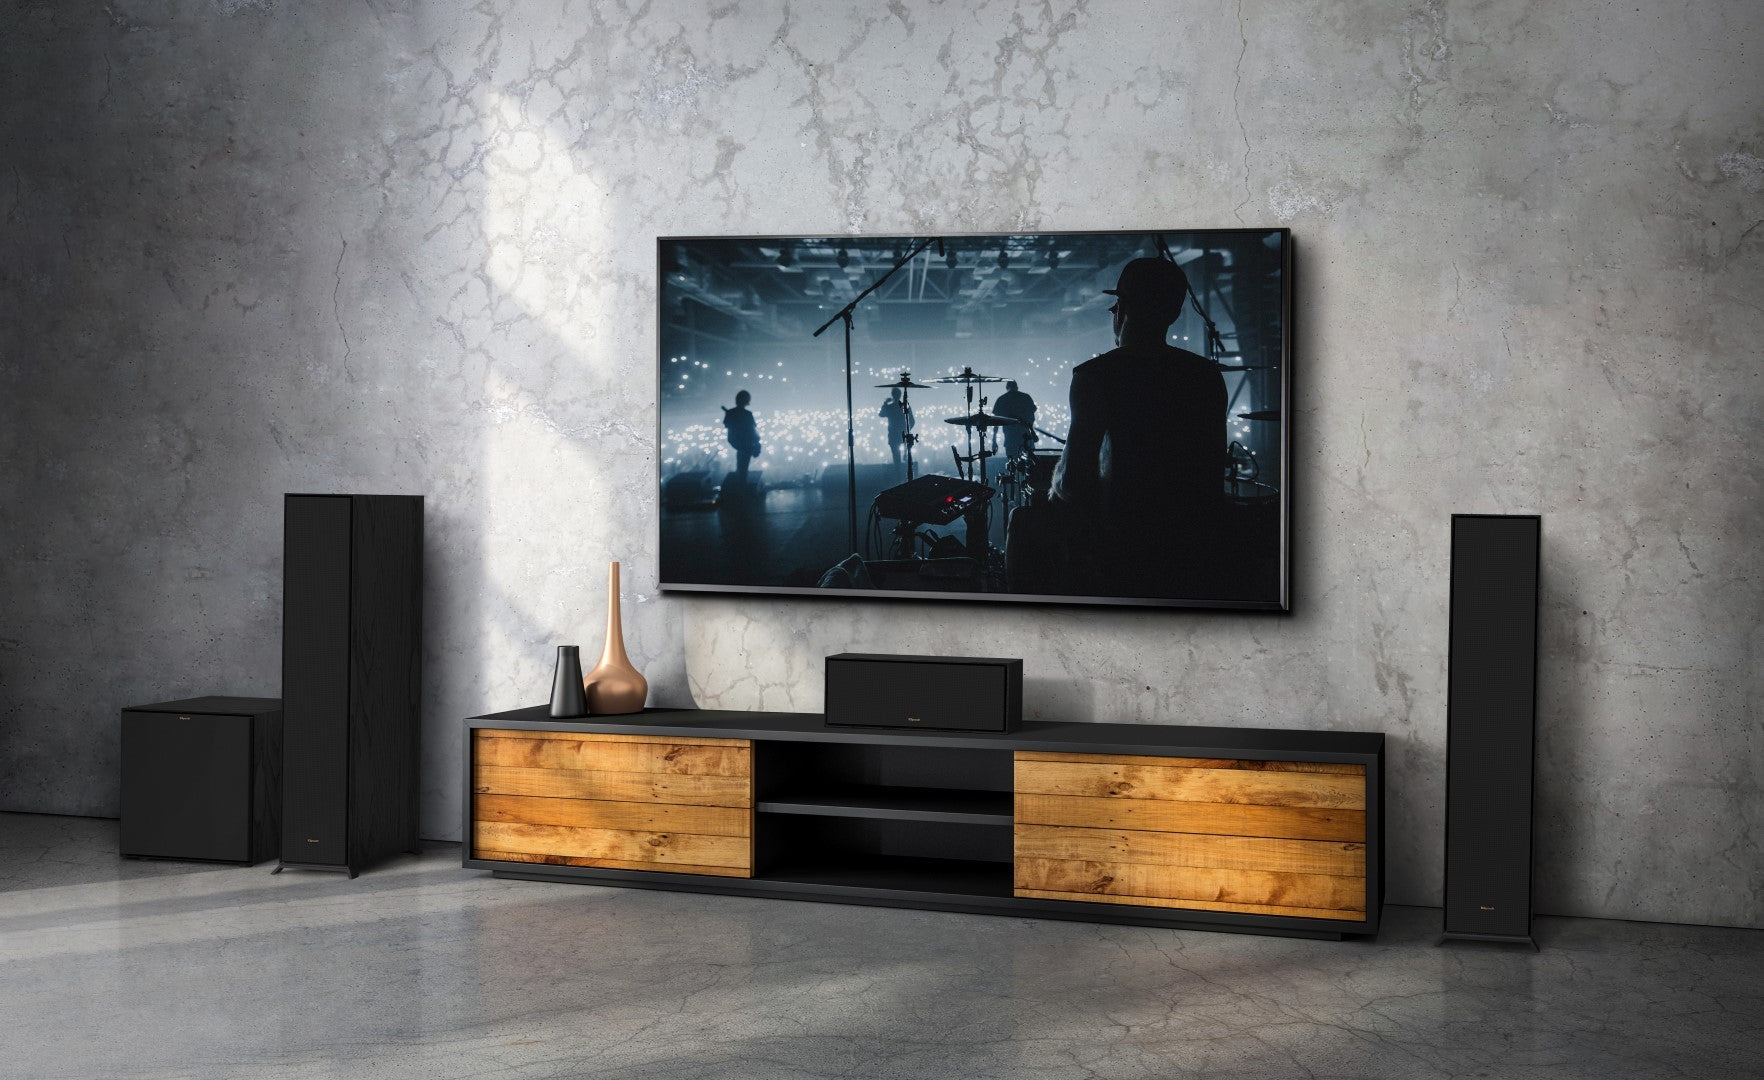 Klipsch Reference Atmos 5.1.2 Pack